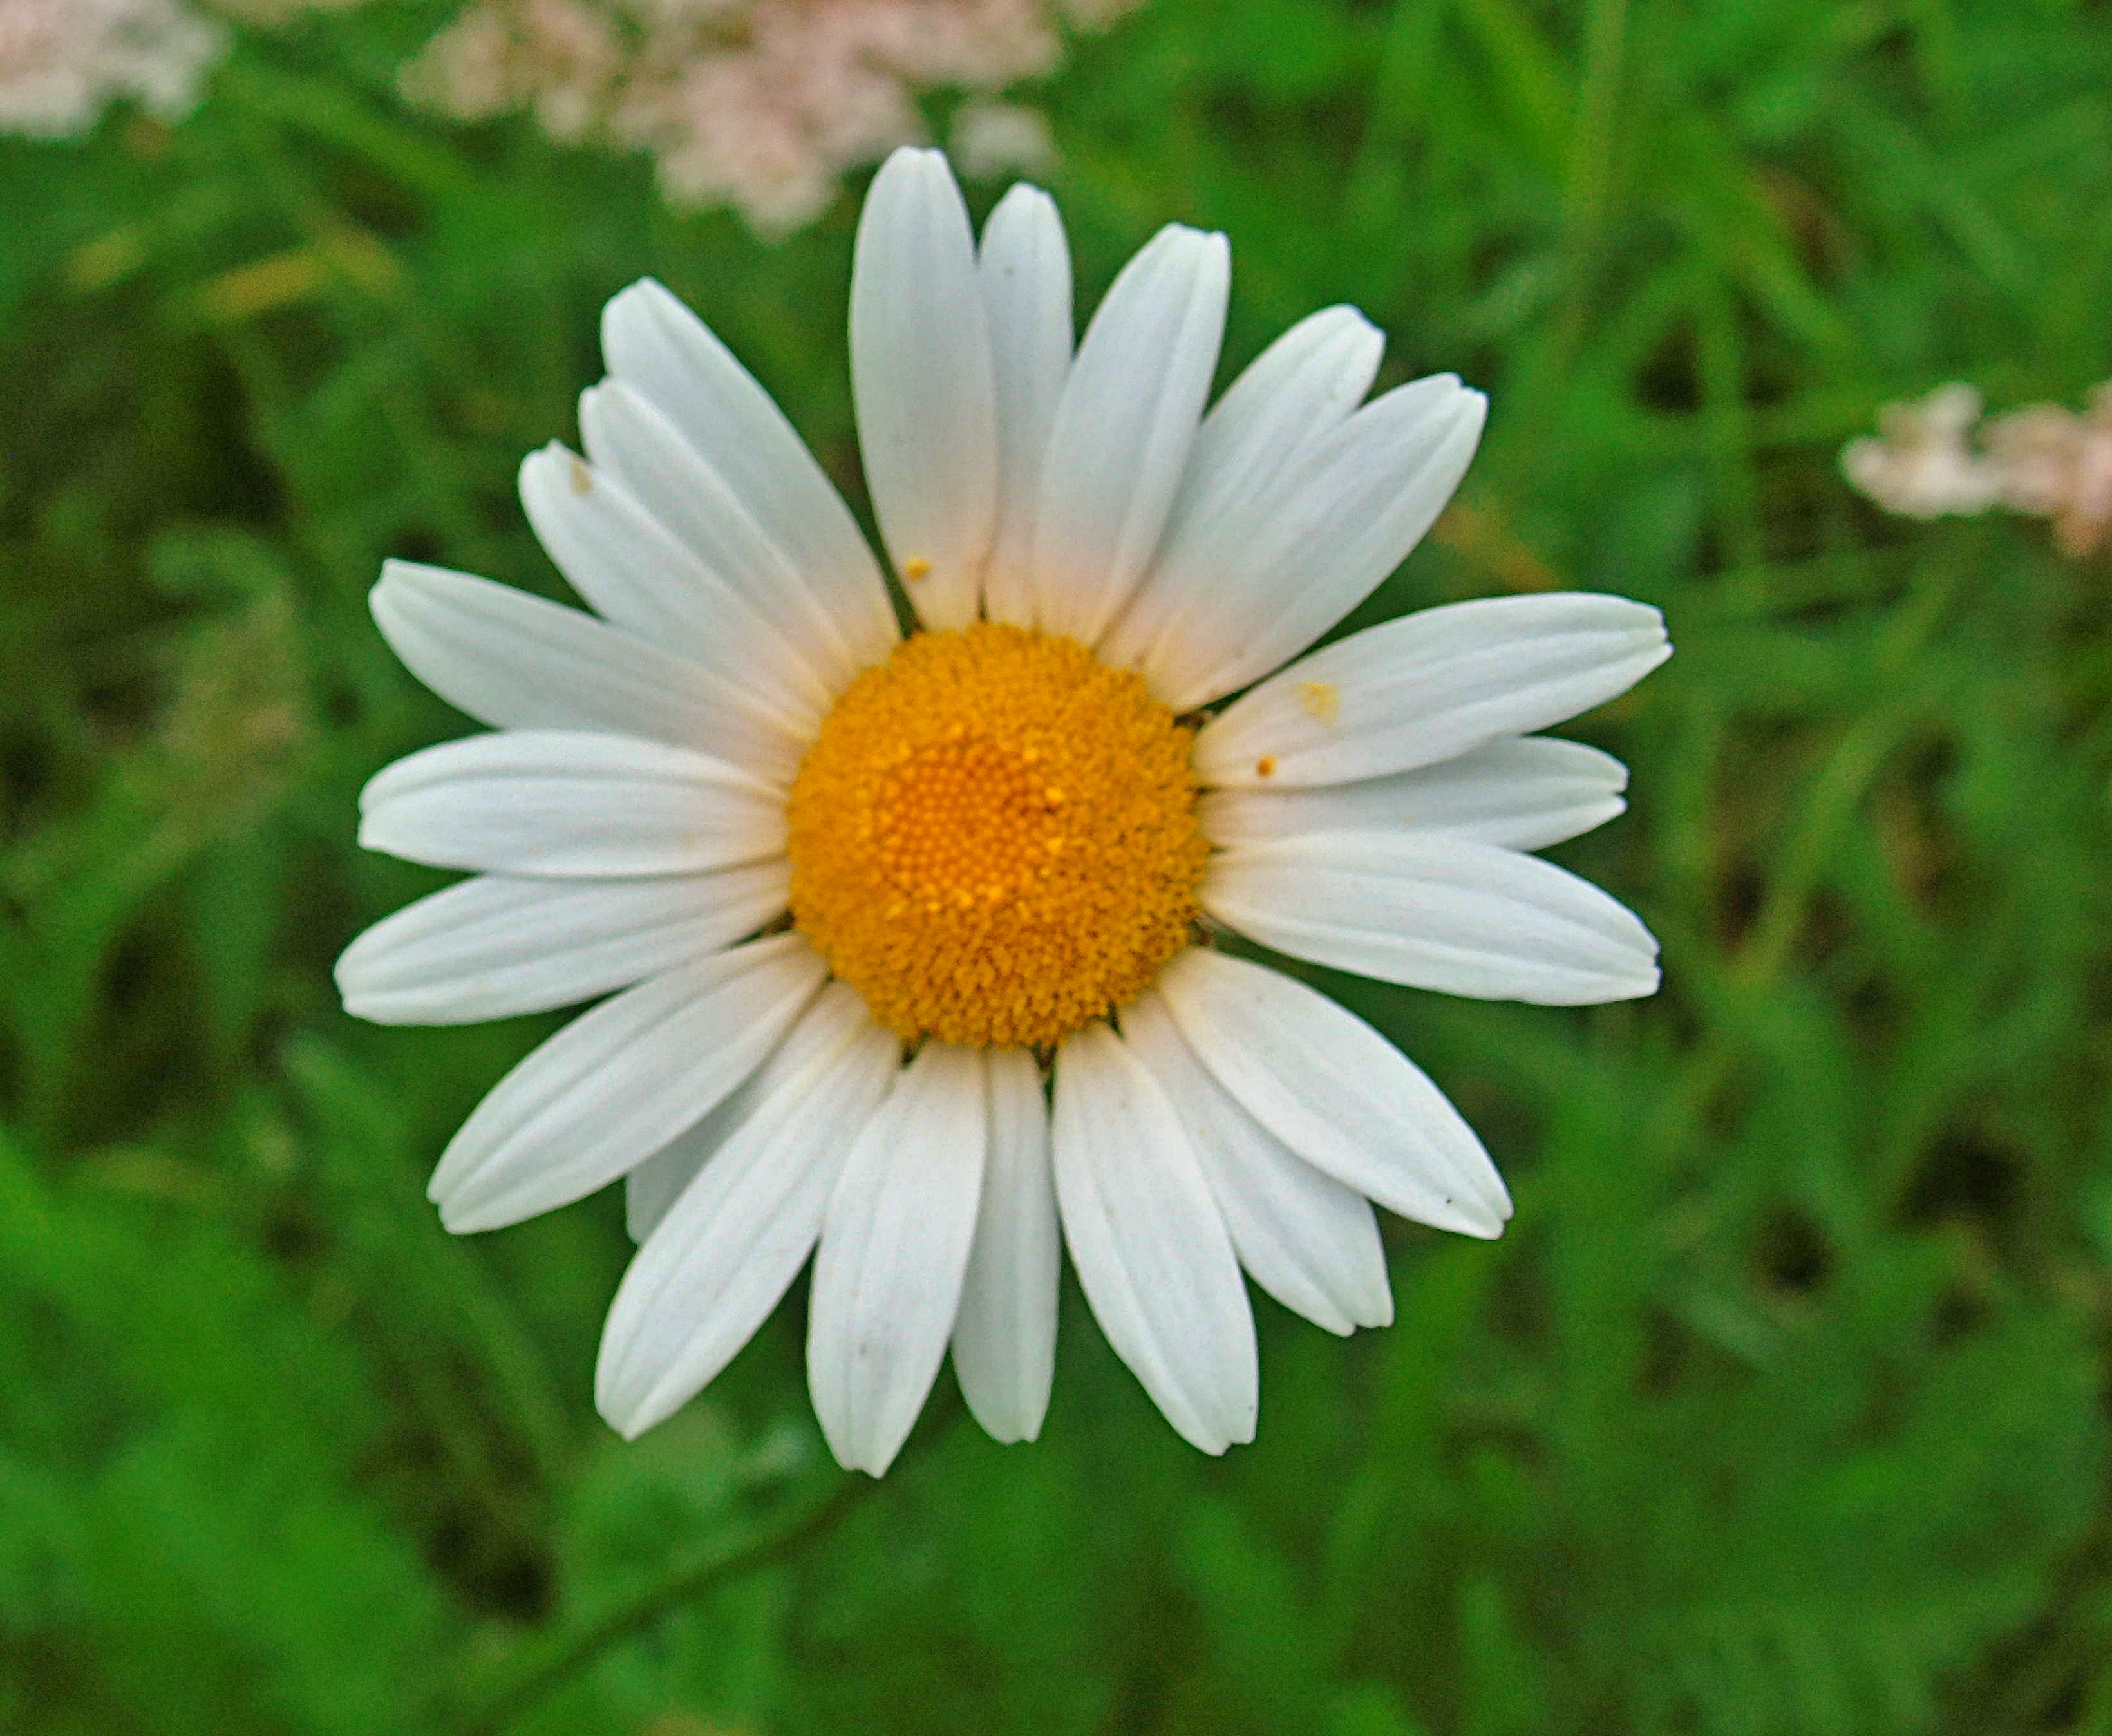 4912_Chamomile_%20Wild_(Scented%20Mayweed)_simply-increasing-color-contrast.jpg